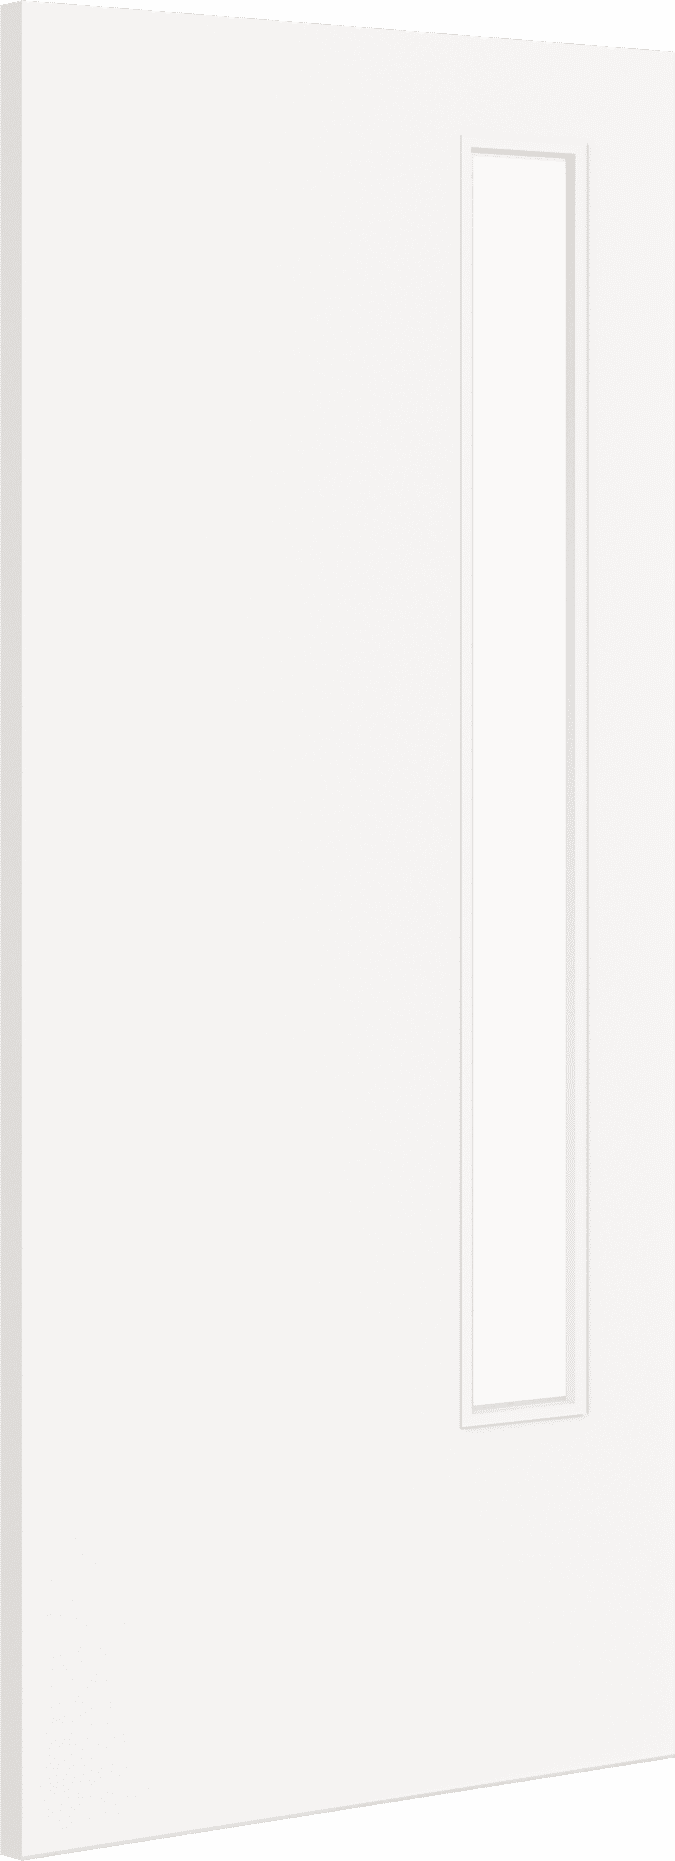 2040mm x 926mm x 44mm Architectural Paint Grade White 13 Clear Glazed Fire Door Blank